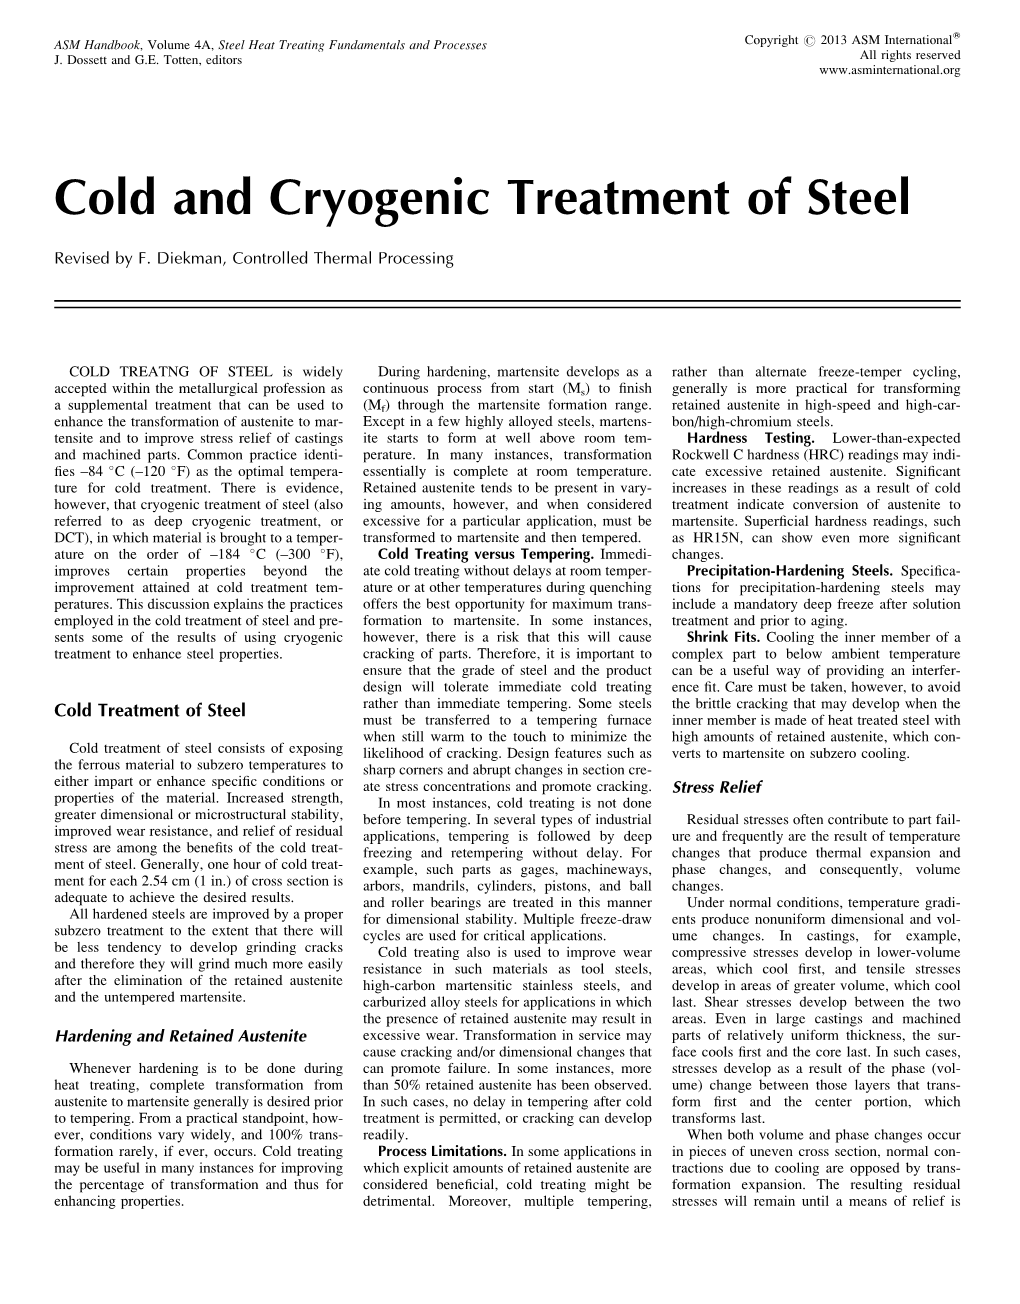 Cold and Cryogenic Treatment of Steel